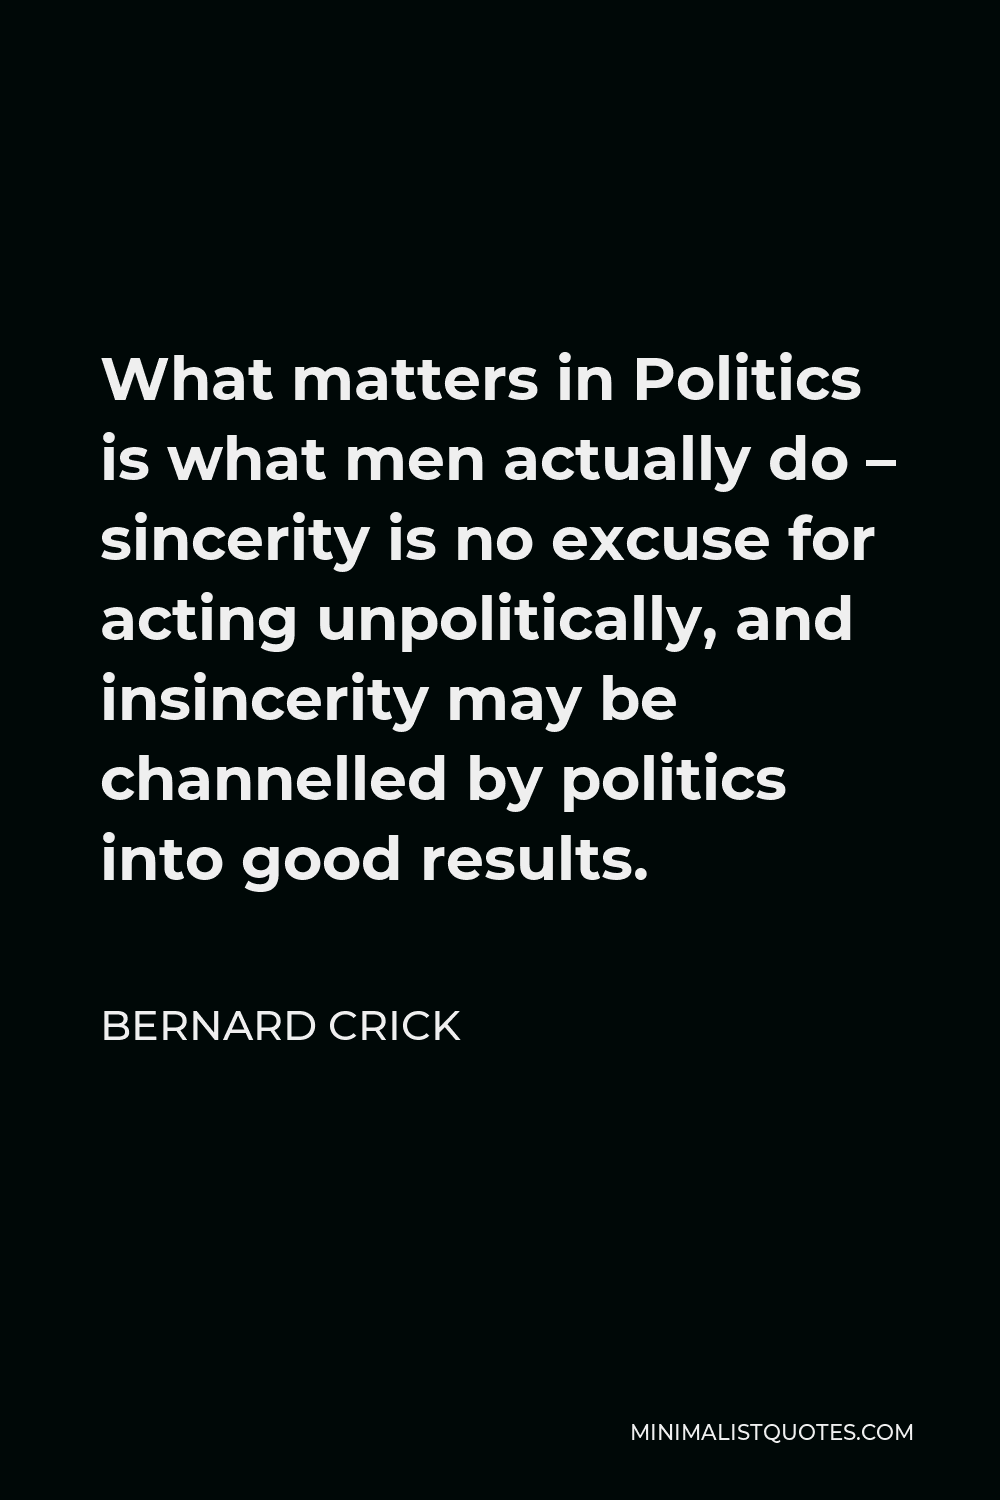 Bernard Crick Quote - What matters in Politics is what men actually do – sincerity is no excuse for acting unpolitically, and insincerity may be channelled by politics into good results.